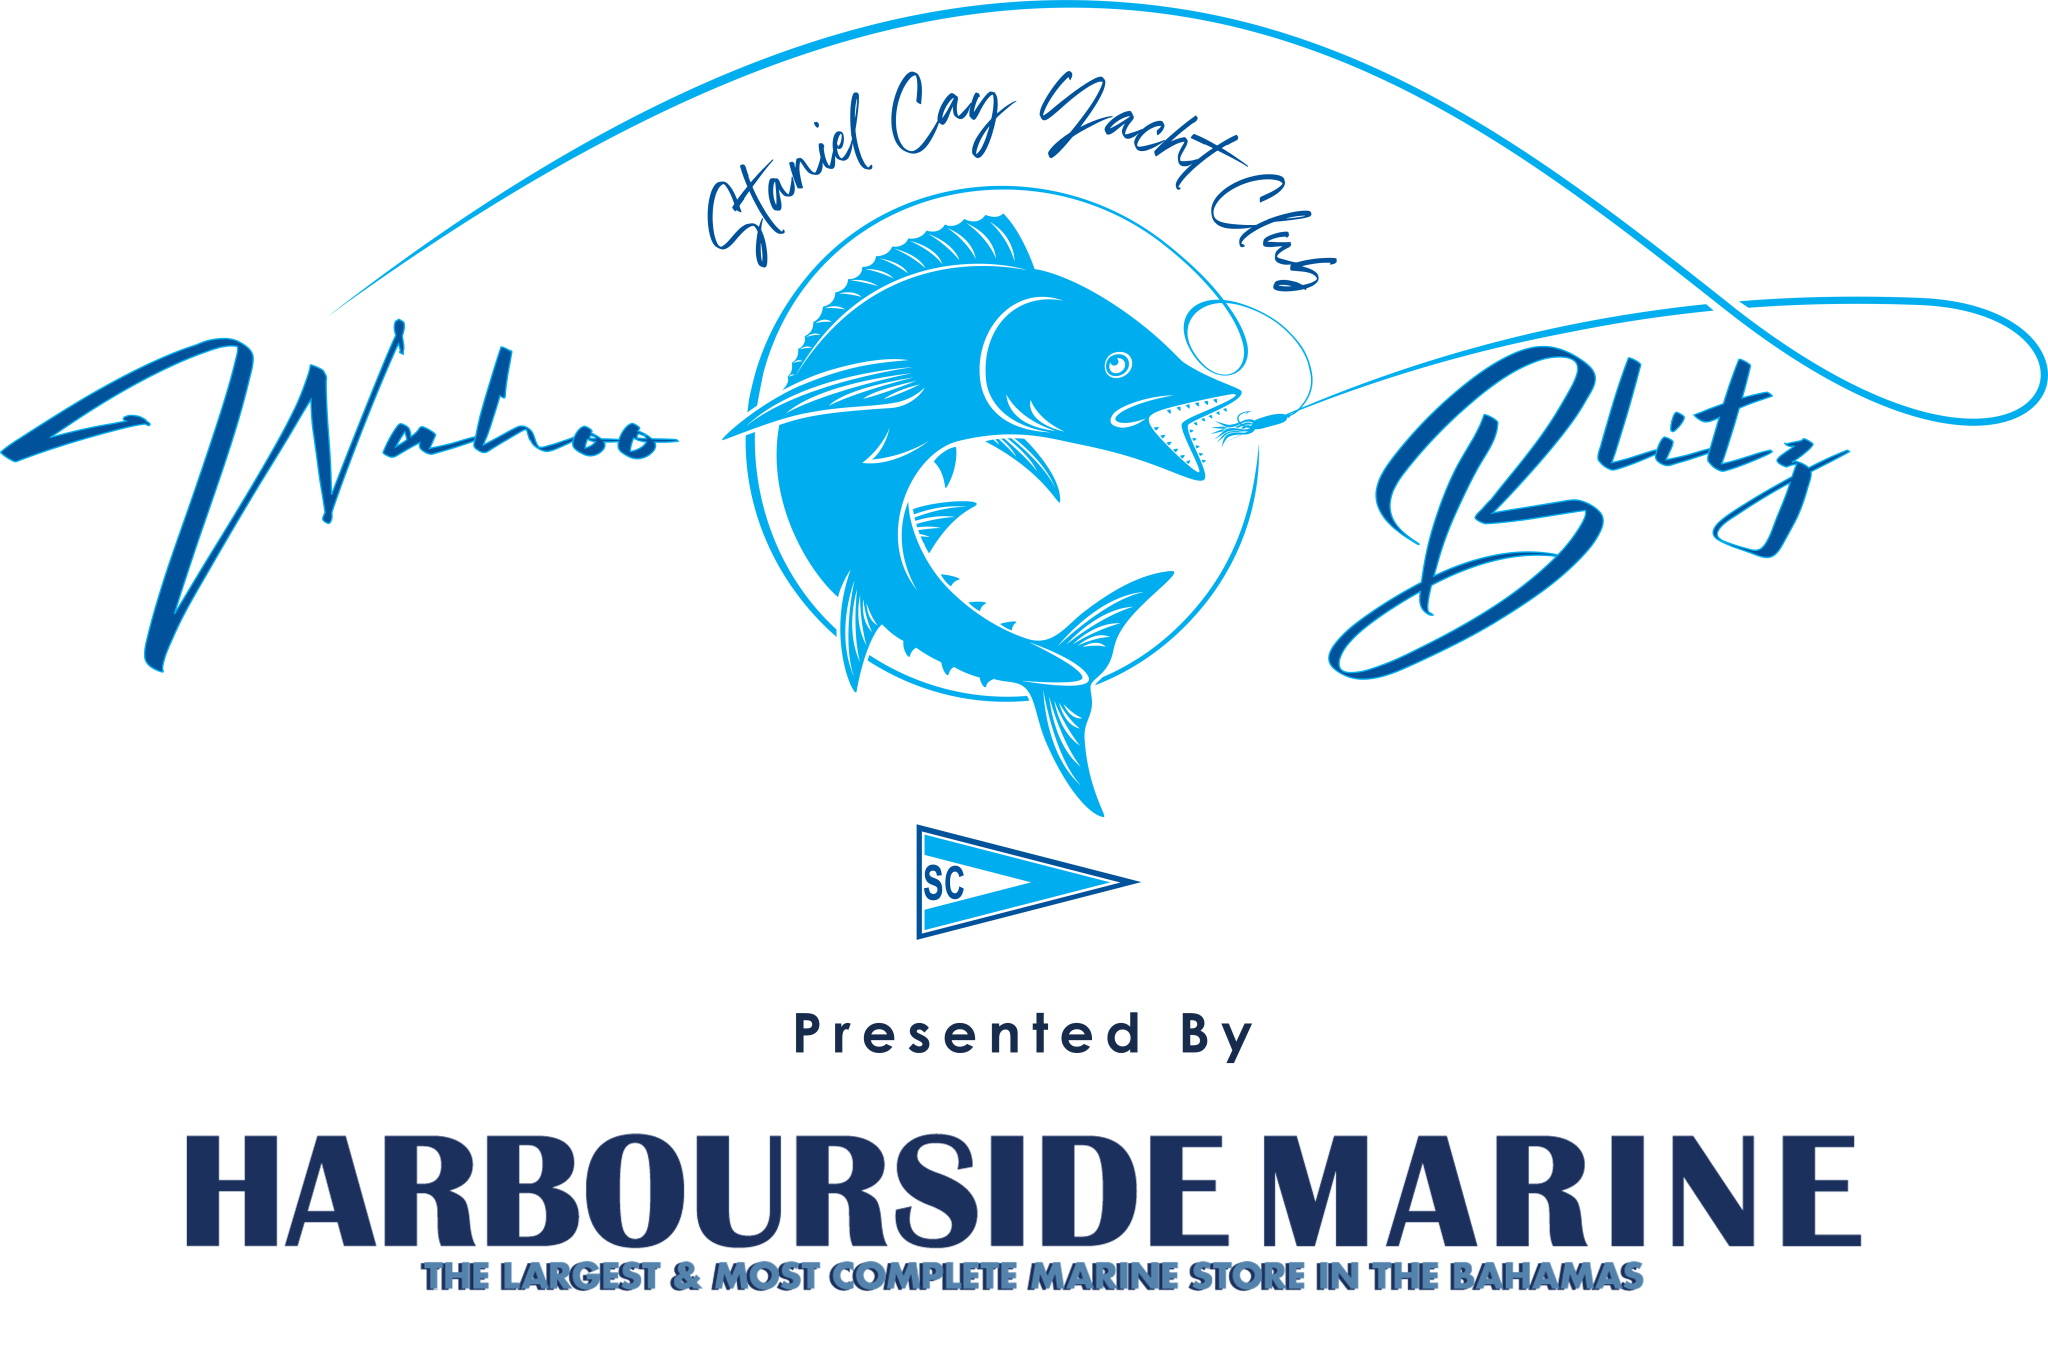 The logo for Staniel Cay Vacation Rentals by Harbourside Marine.